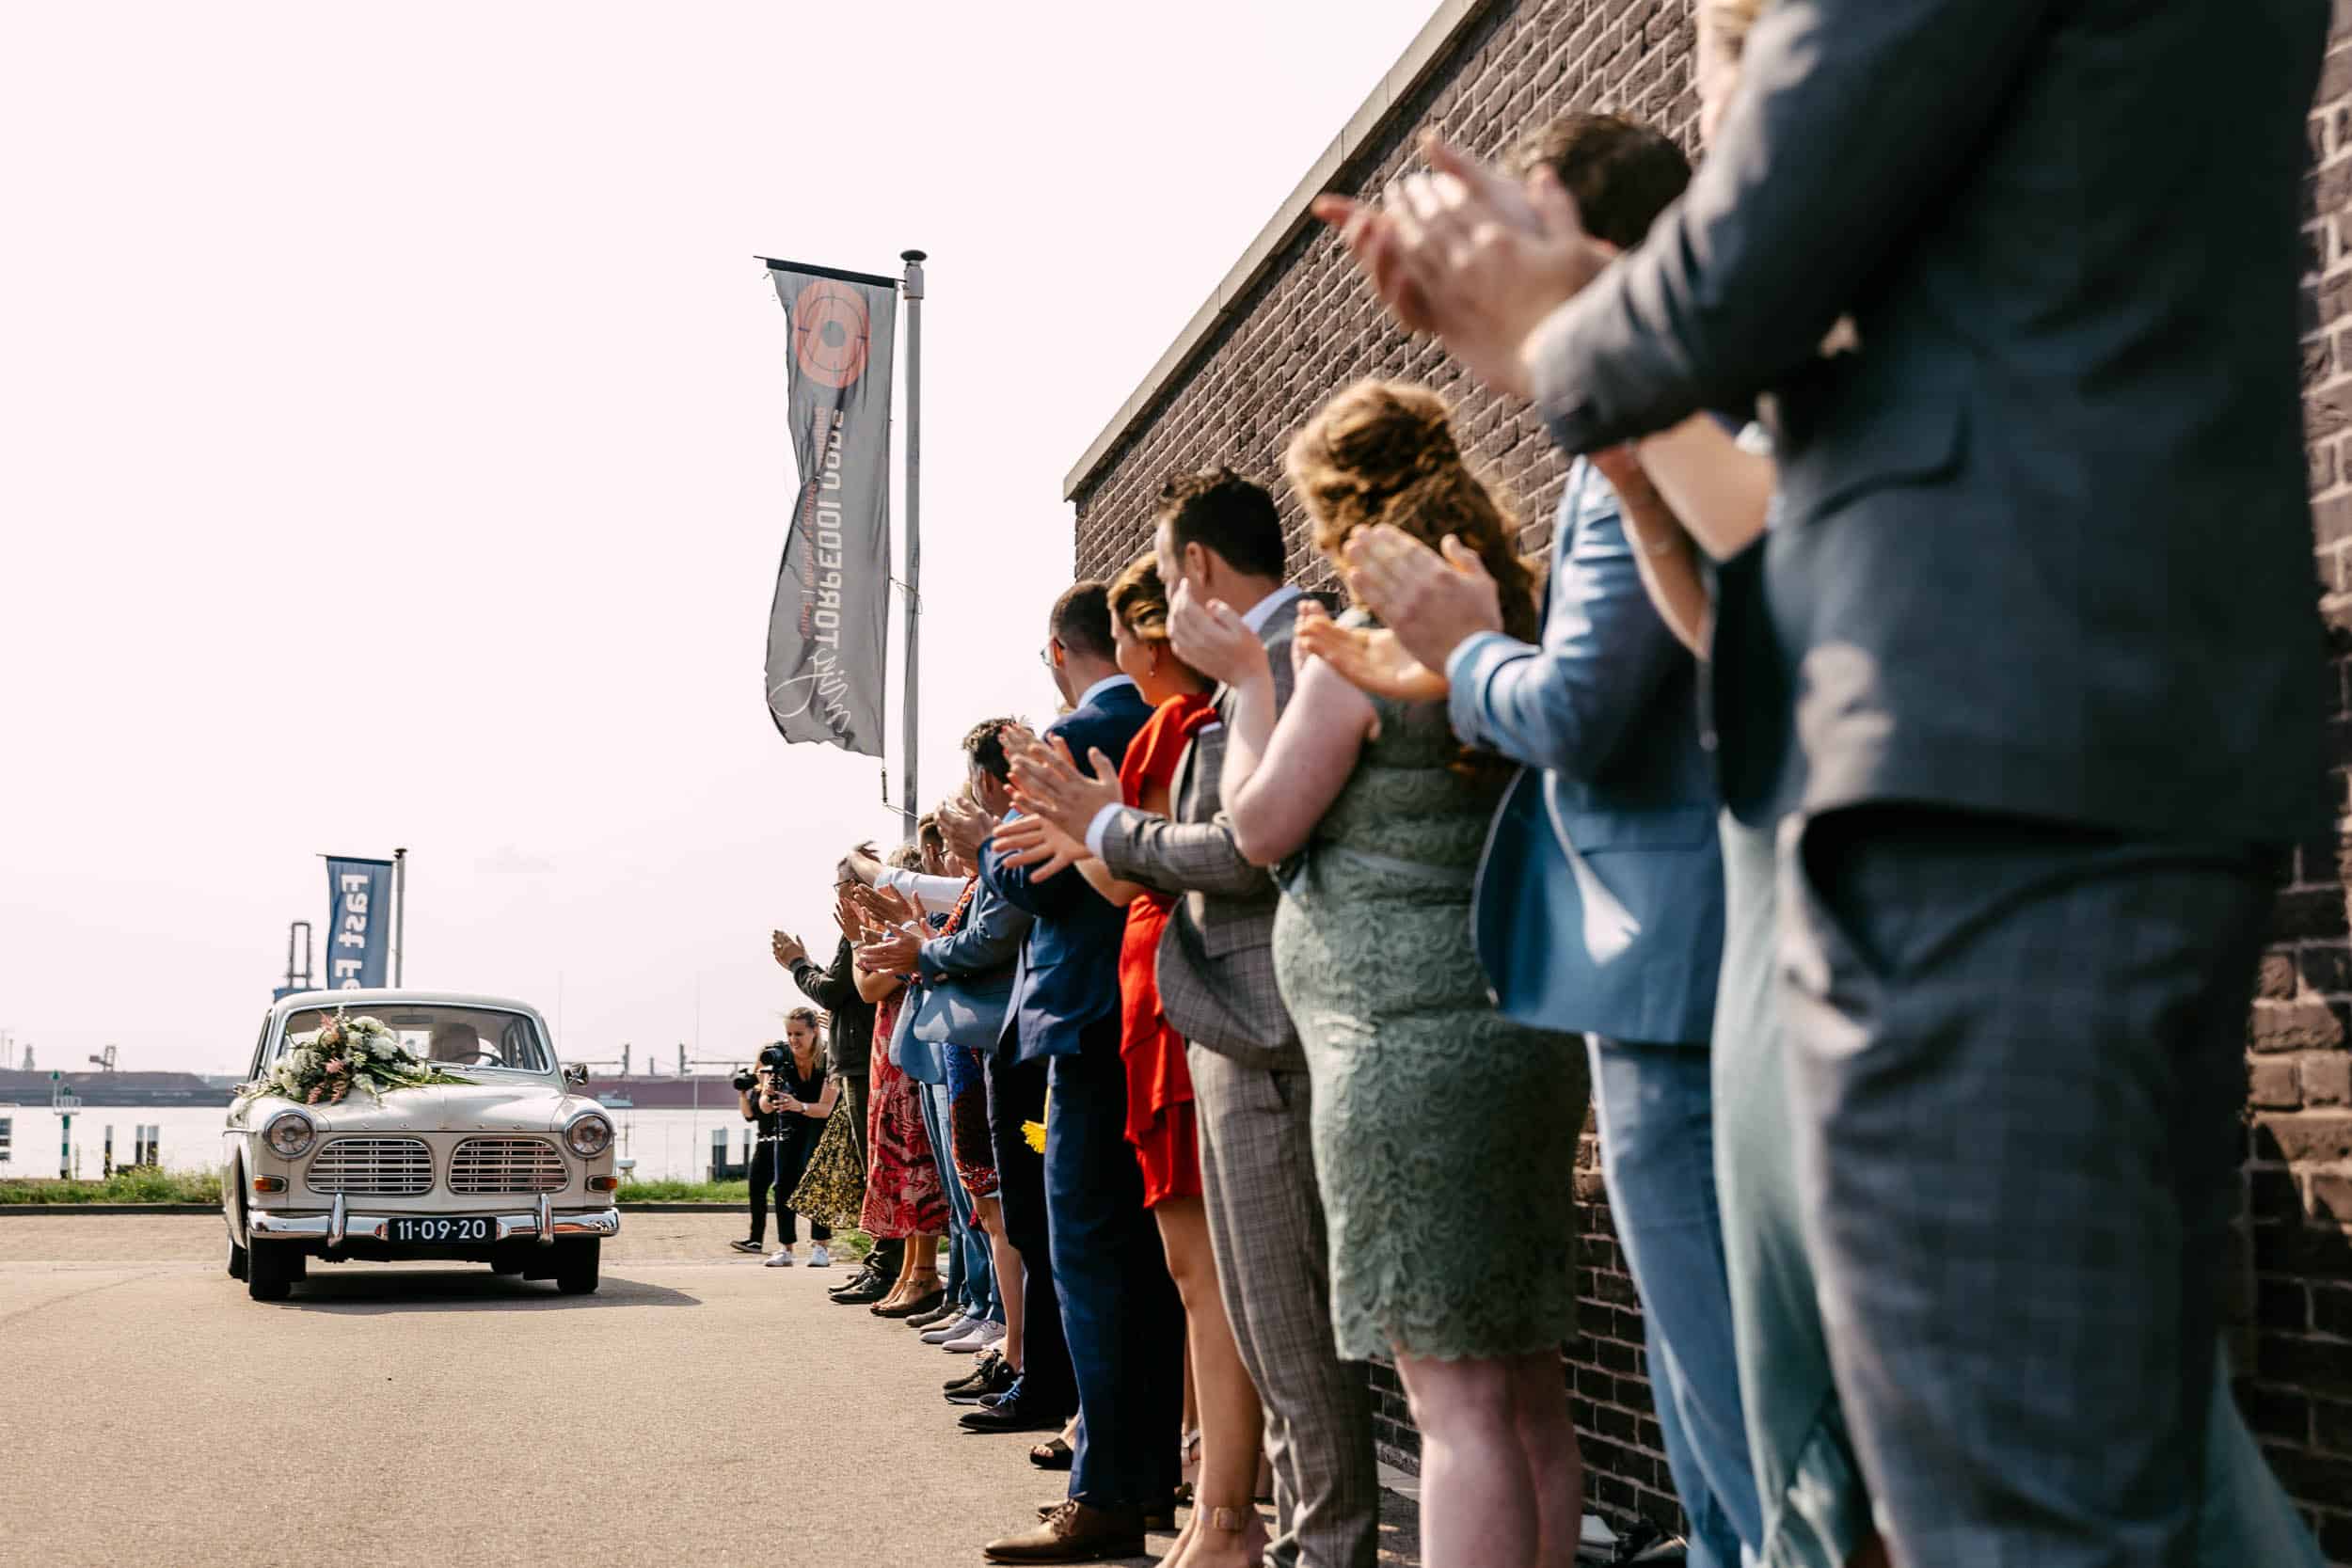 A group of people clap in front of a car.